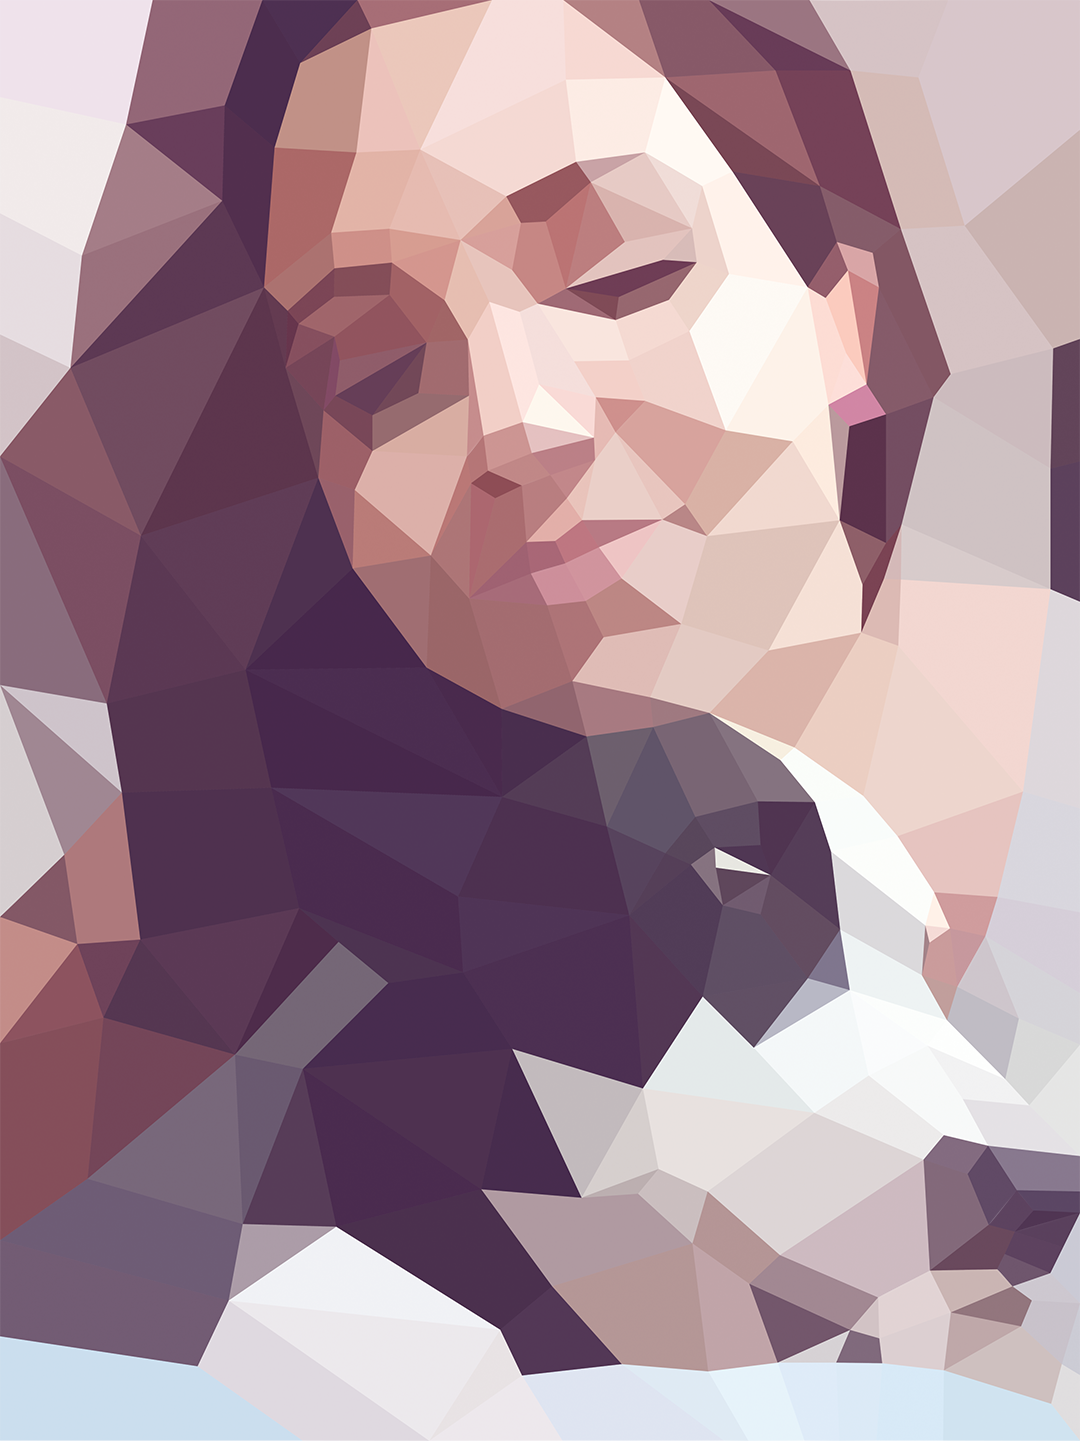 Illustrator low-poly vector